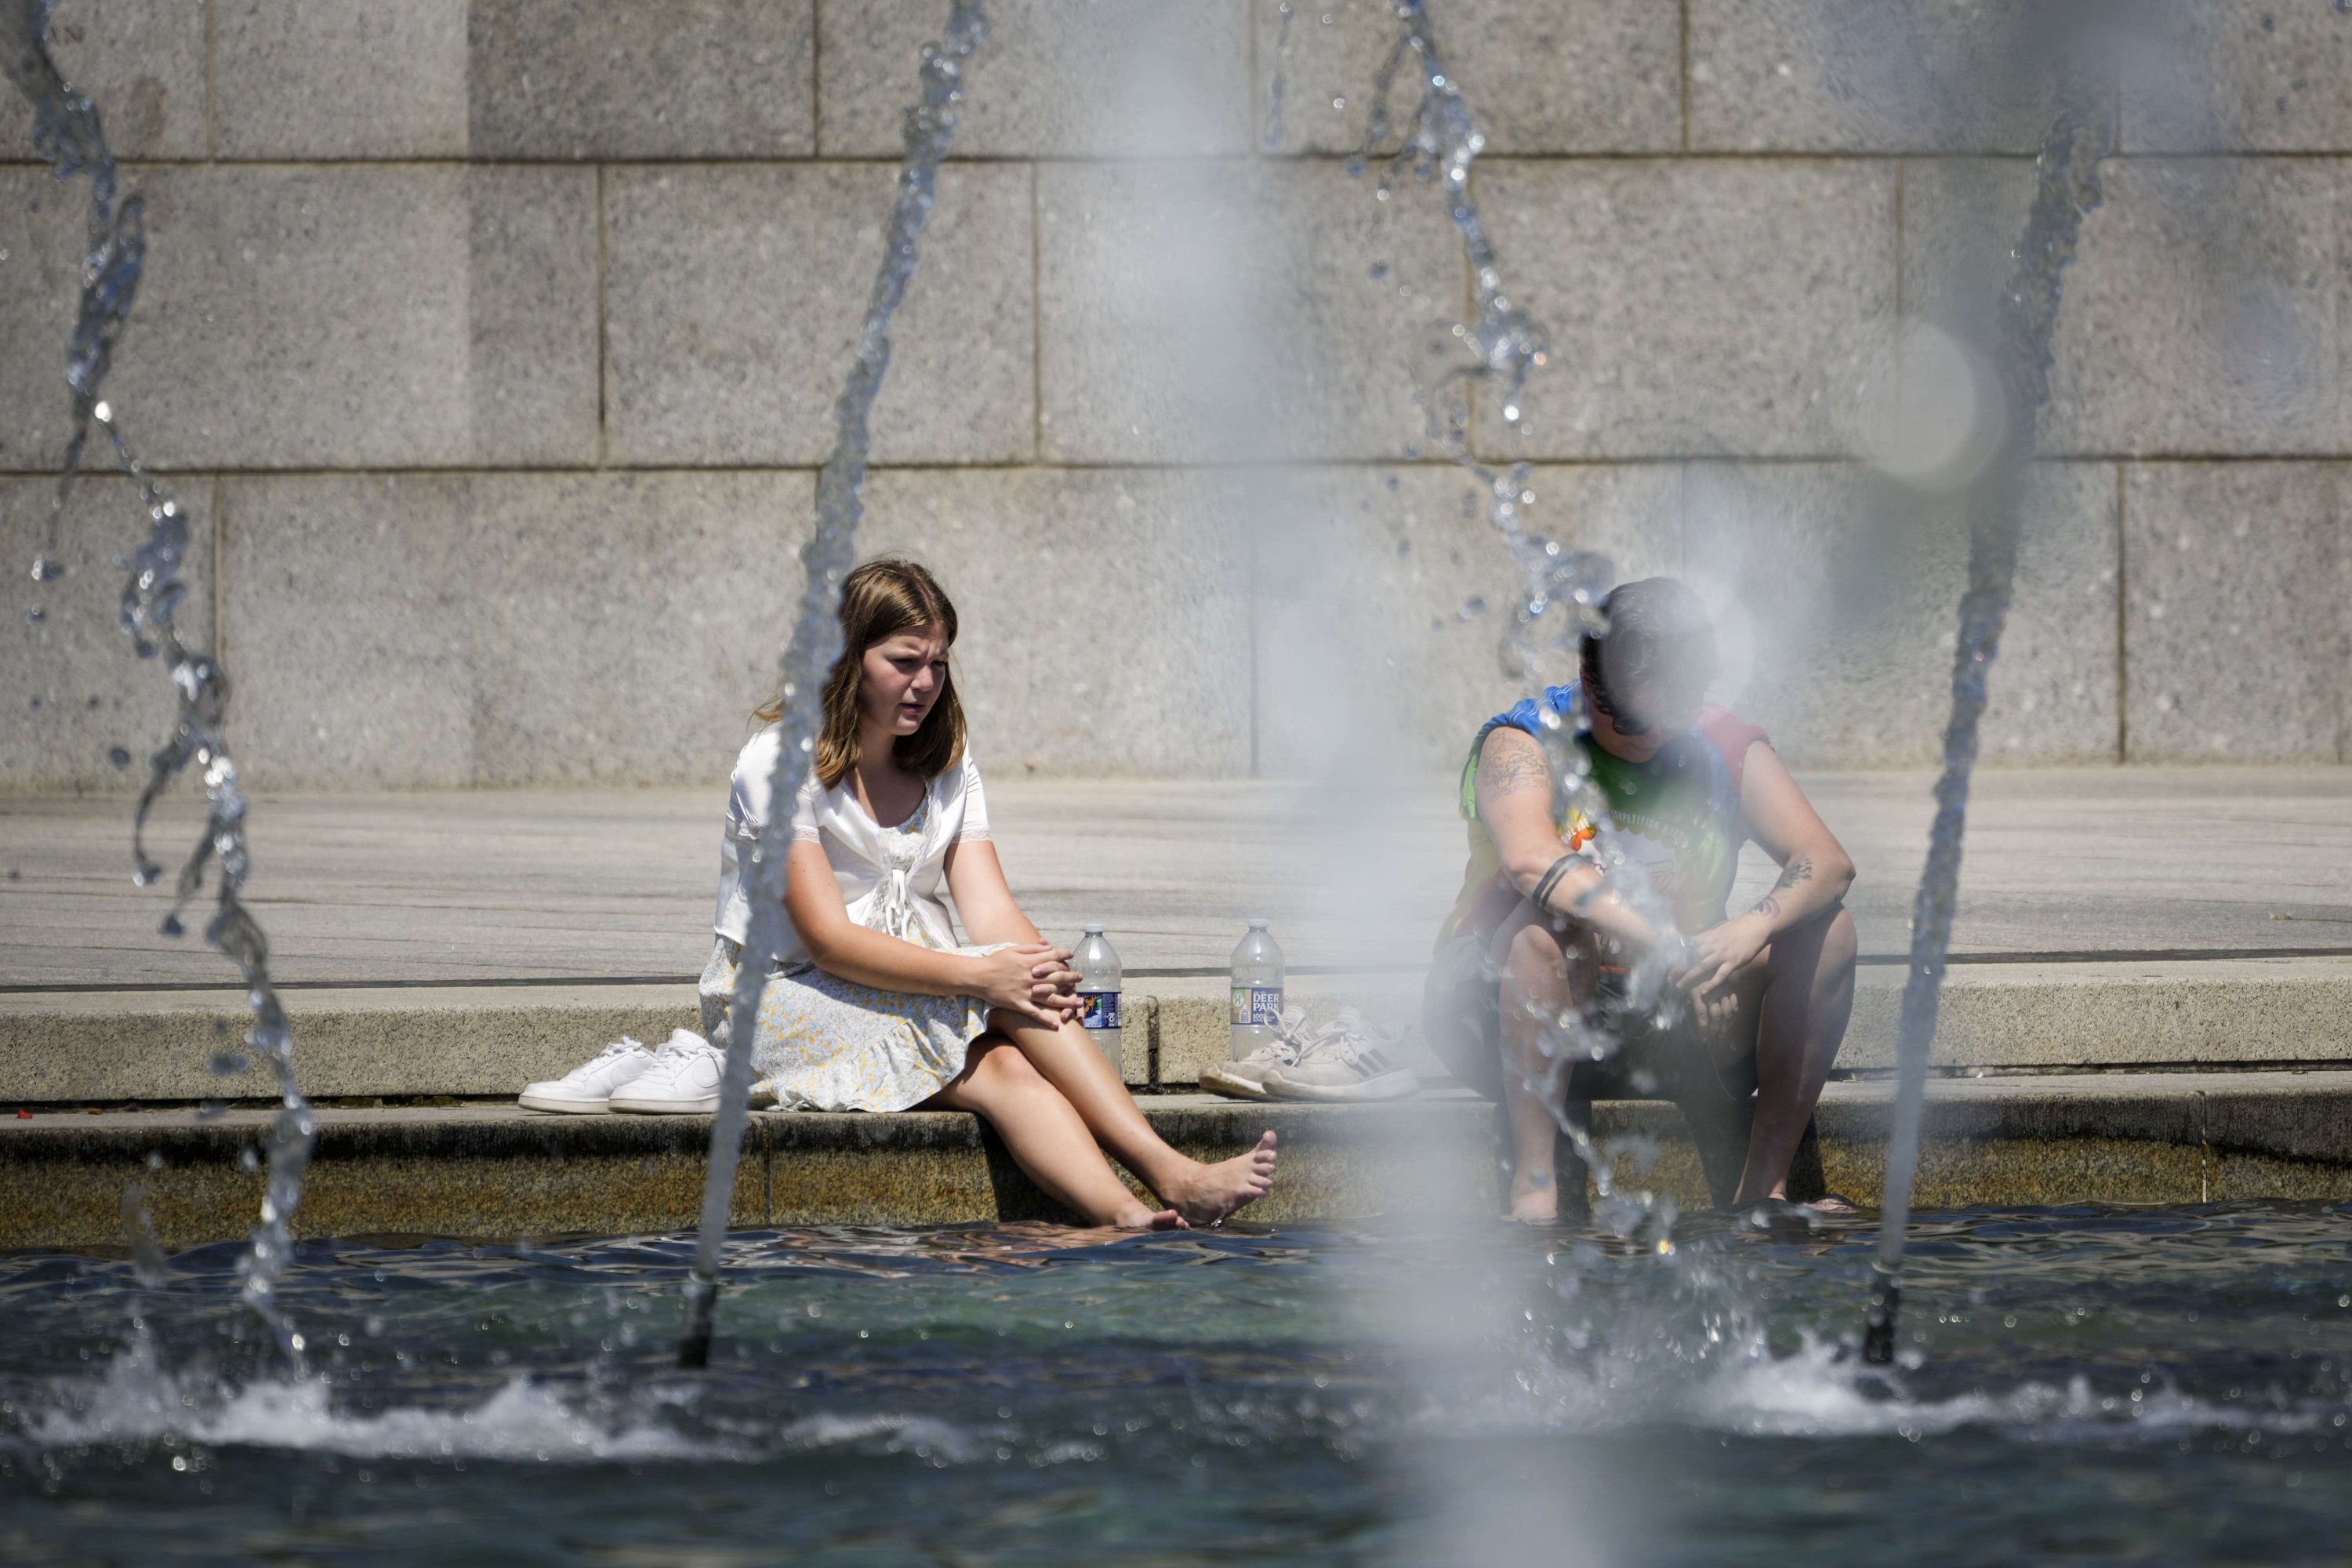 People cool off in the fountains at the World War II Memorial on the National Mall June 29, 2021 in Washington, D.C., U.S. (AFP Photo)